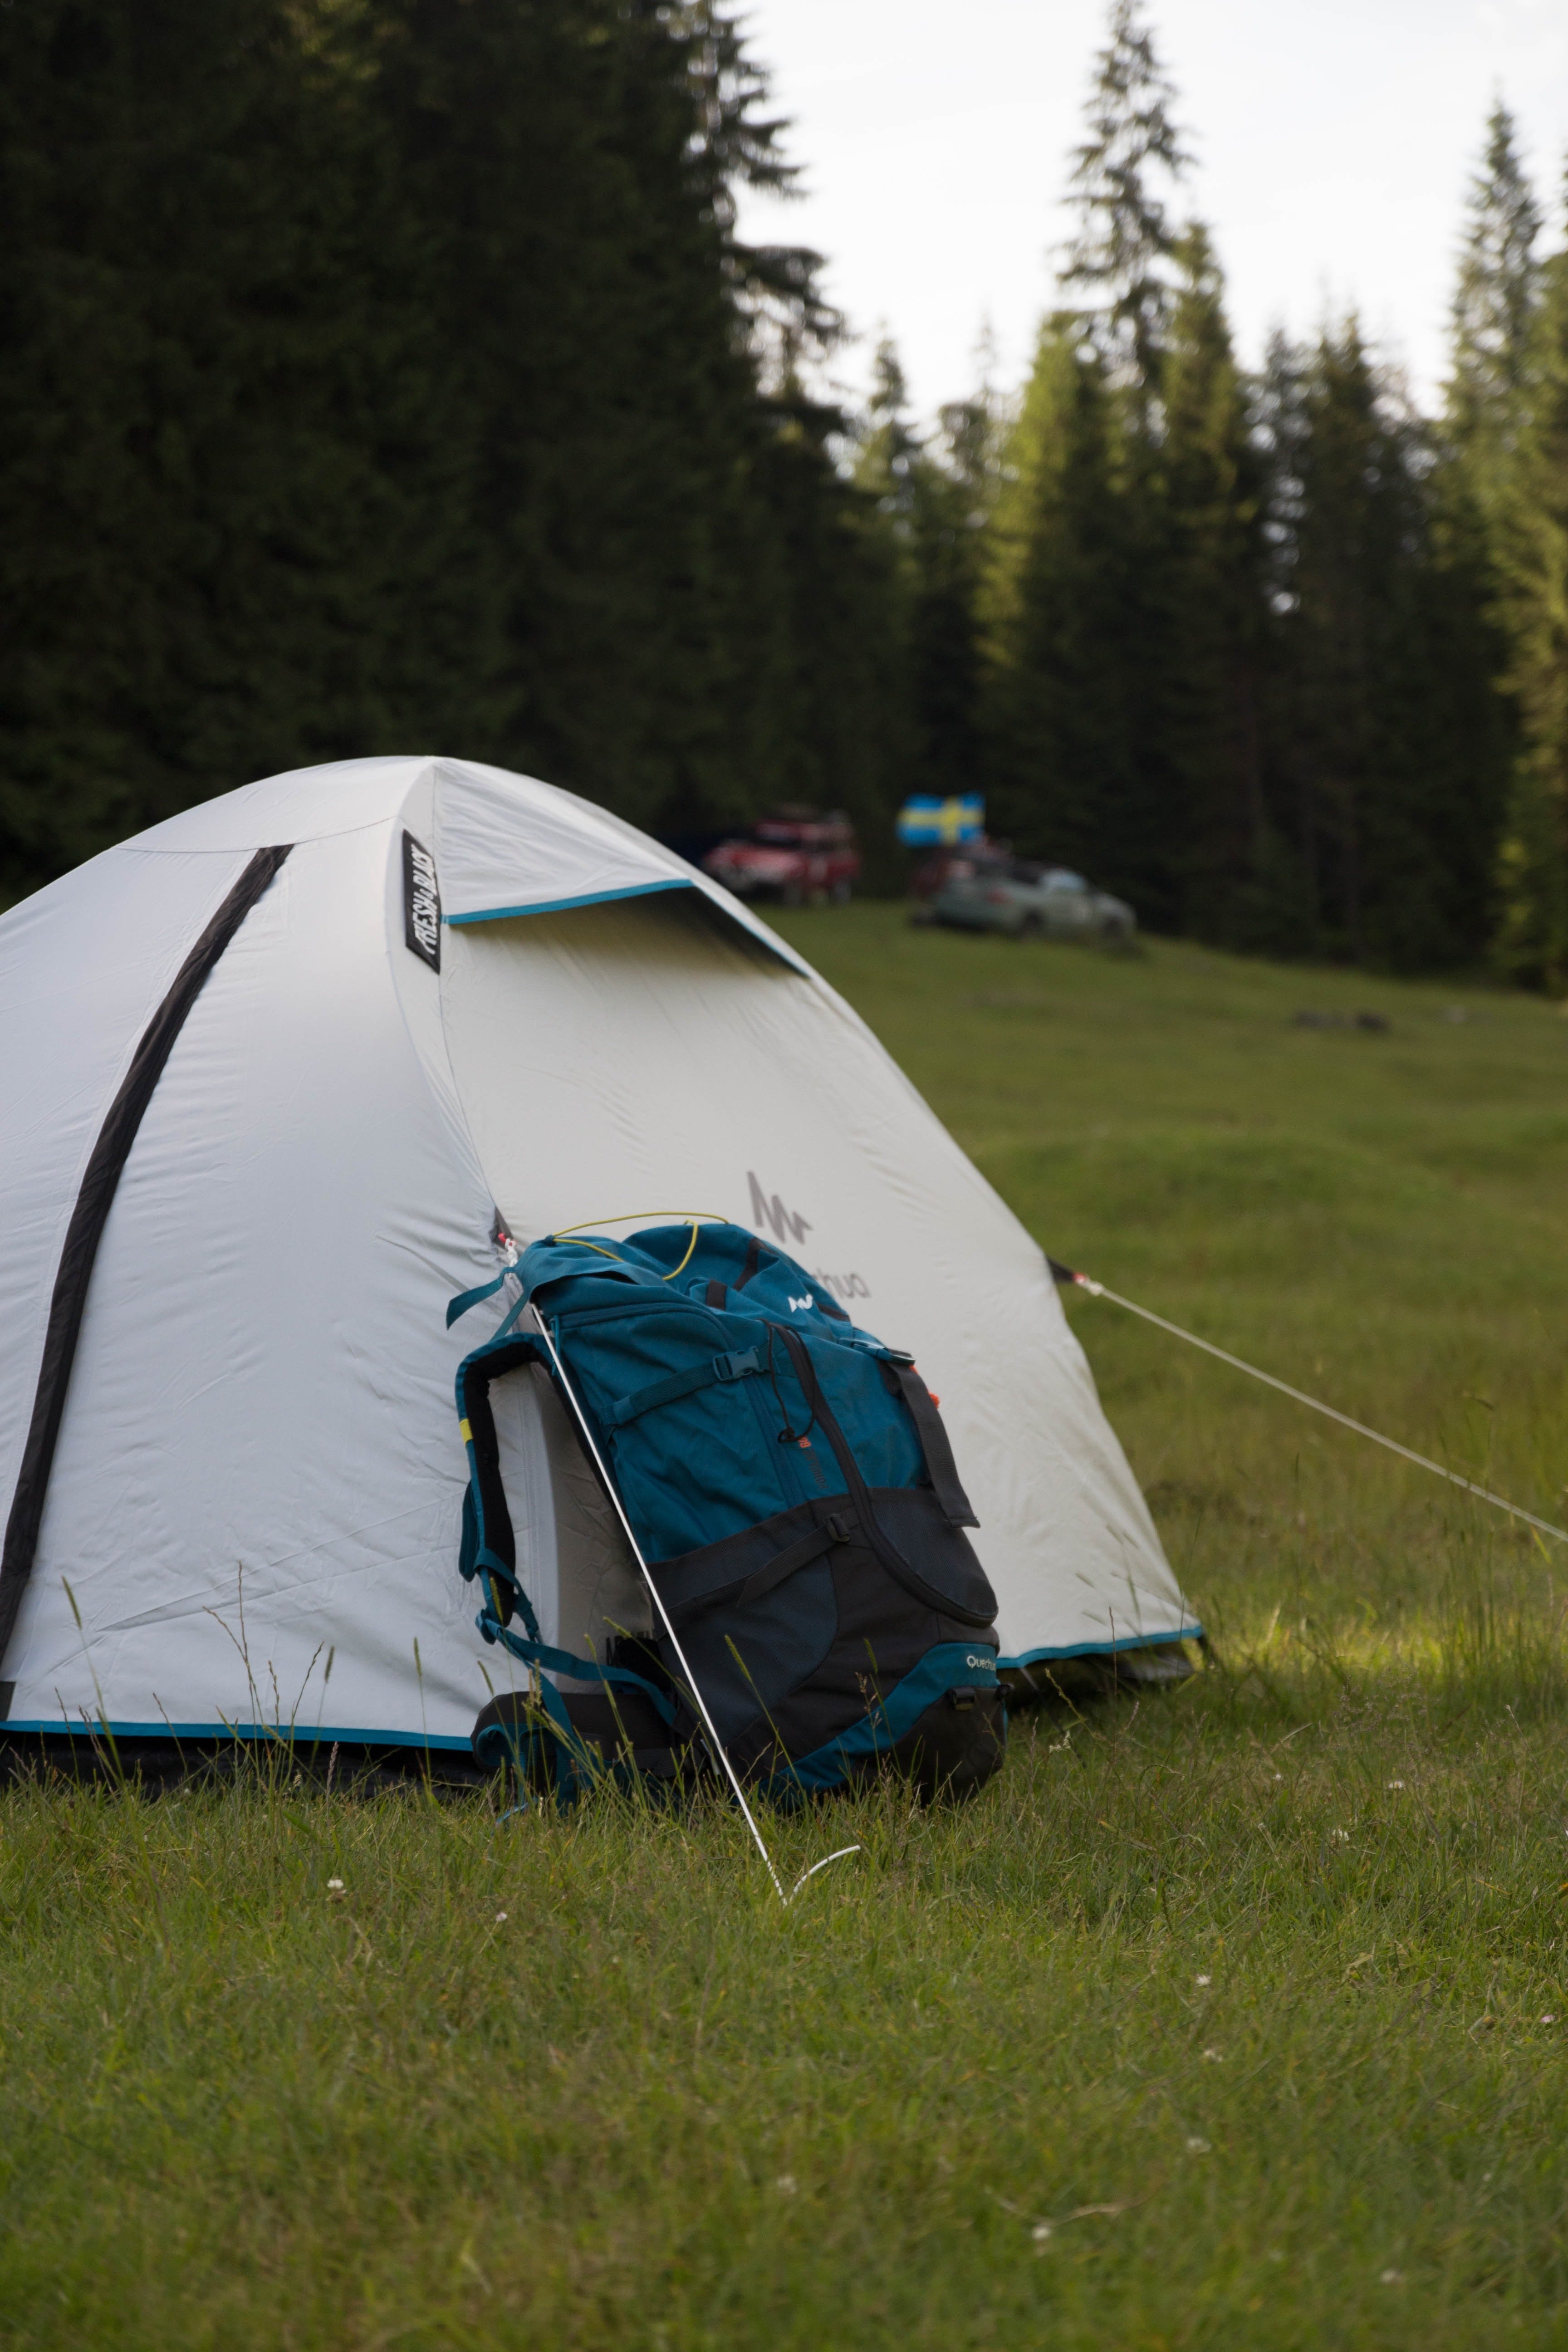 A picture of a campsite | Source: Pexels